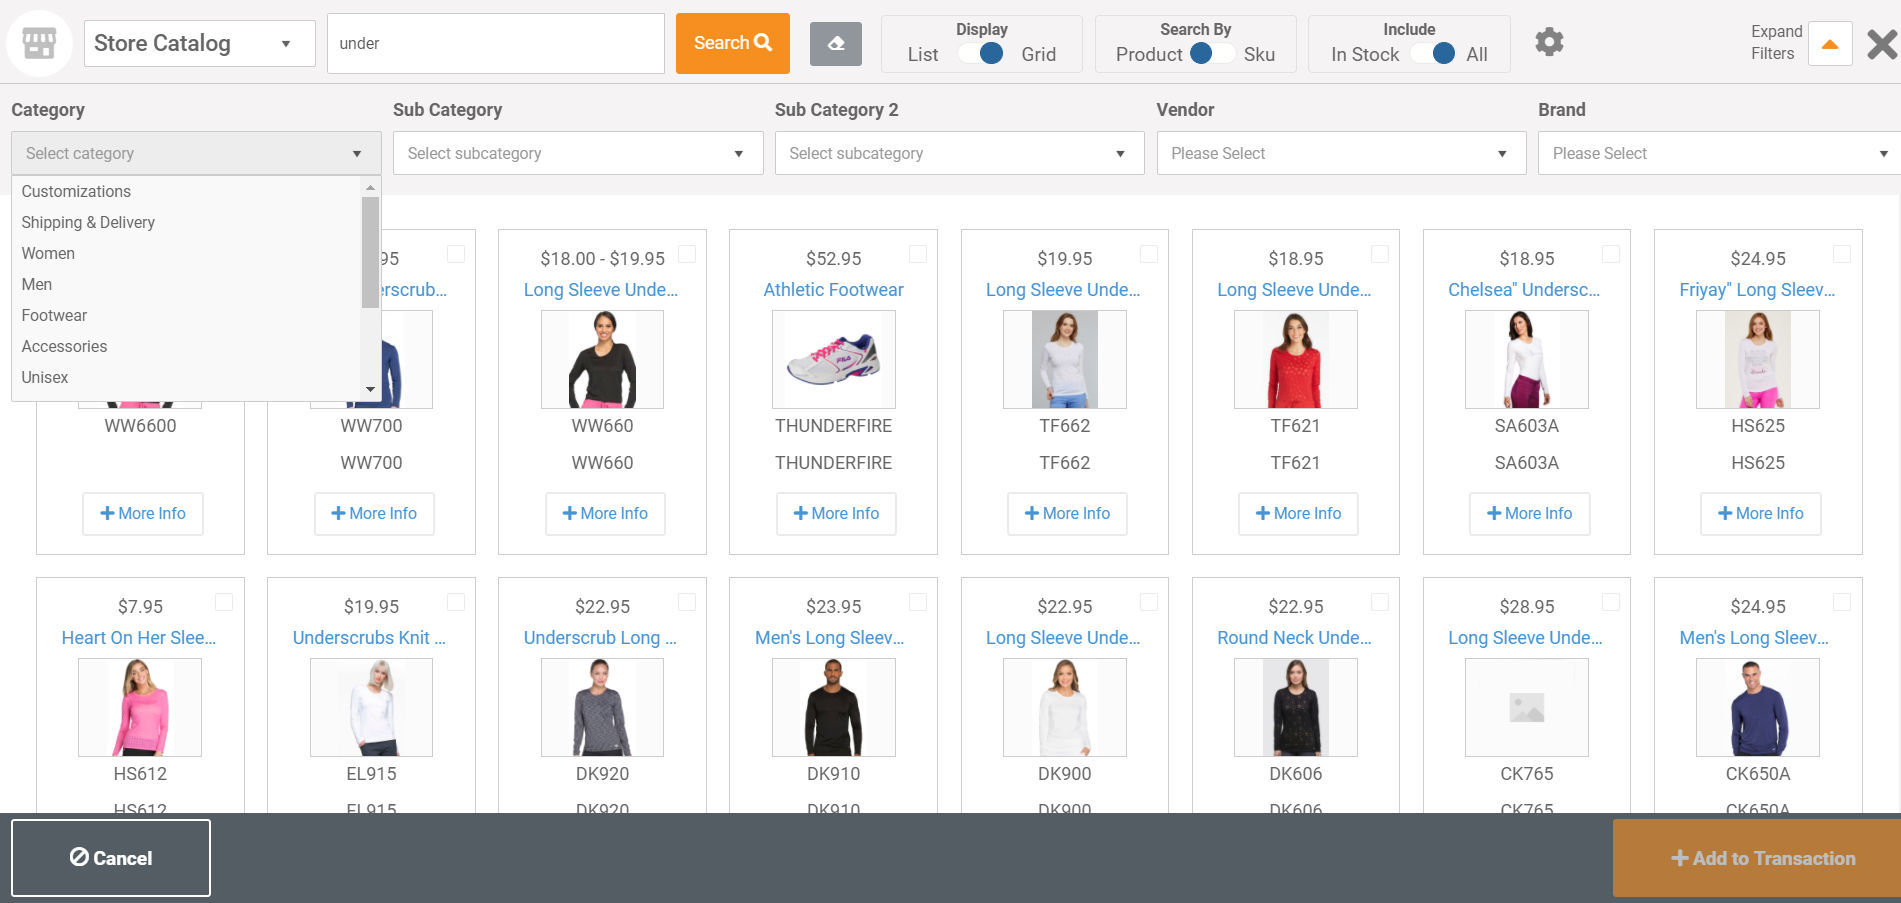 MicroBiz Cloud POS Software - Advanced Product Search - Allows you to search by item name, SKU, style, UPC or Alt ID.  Results can be displayed in table format or as product tiles.  Advanced filters allow you to view results by category, vendors, brand, color, size or other attribute.